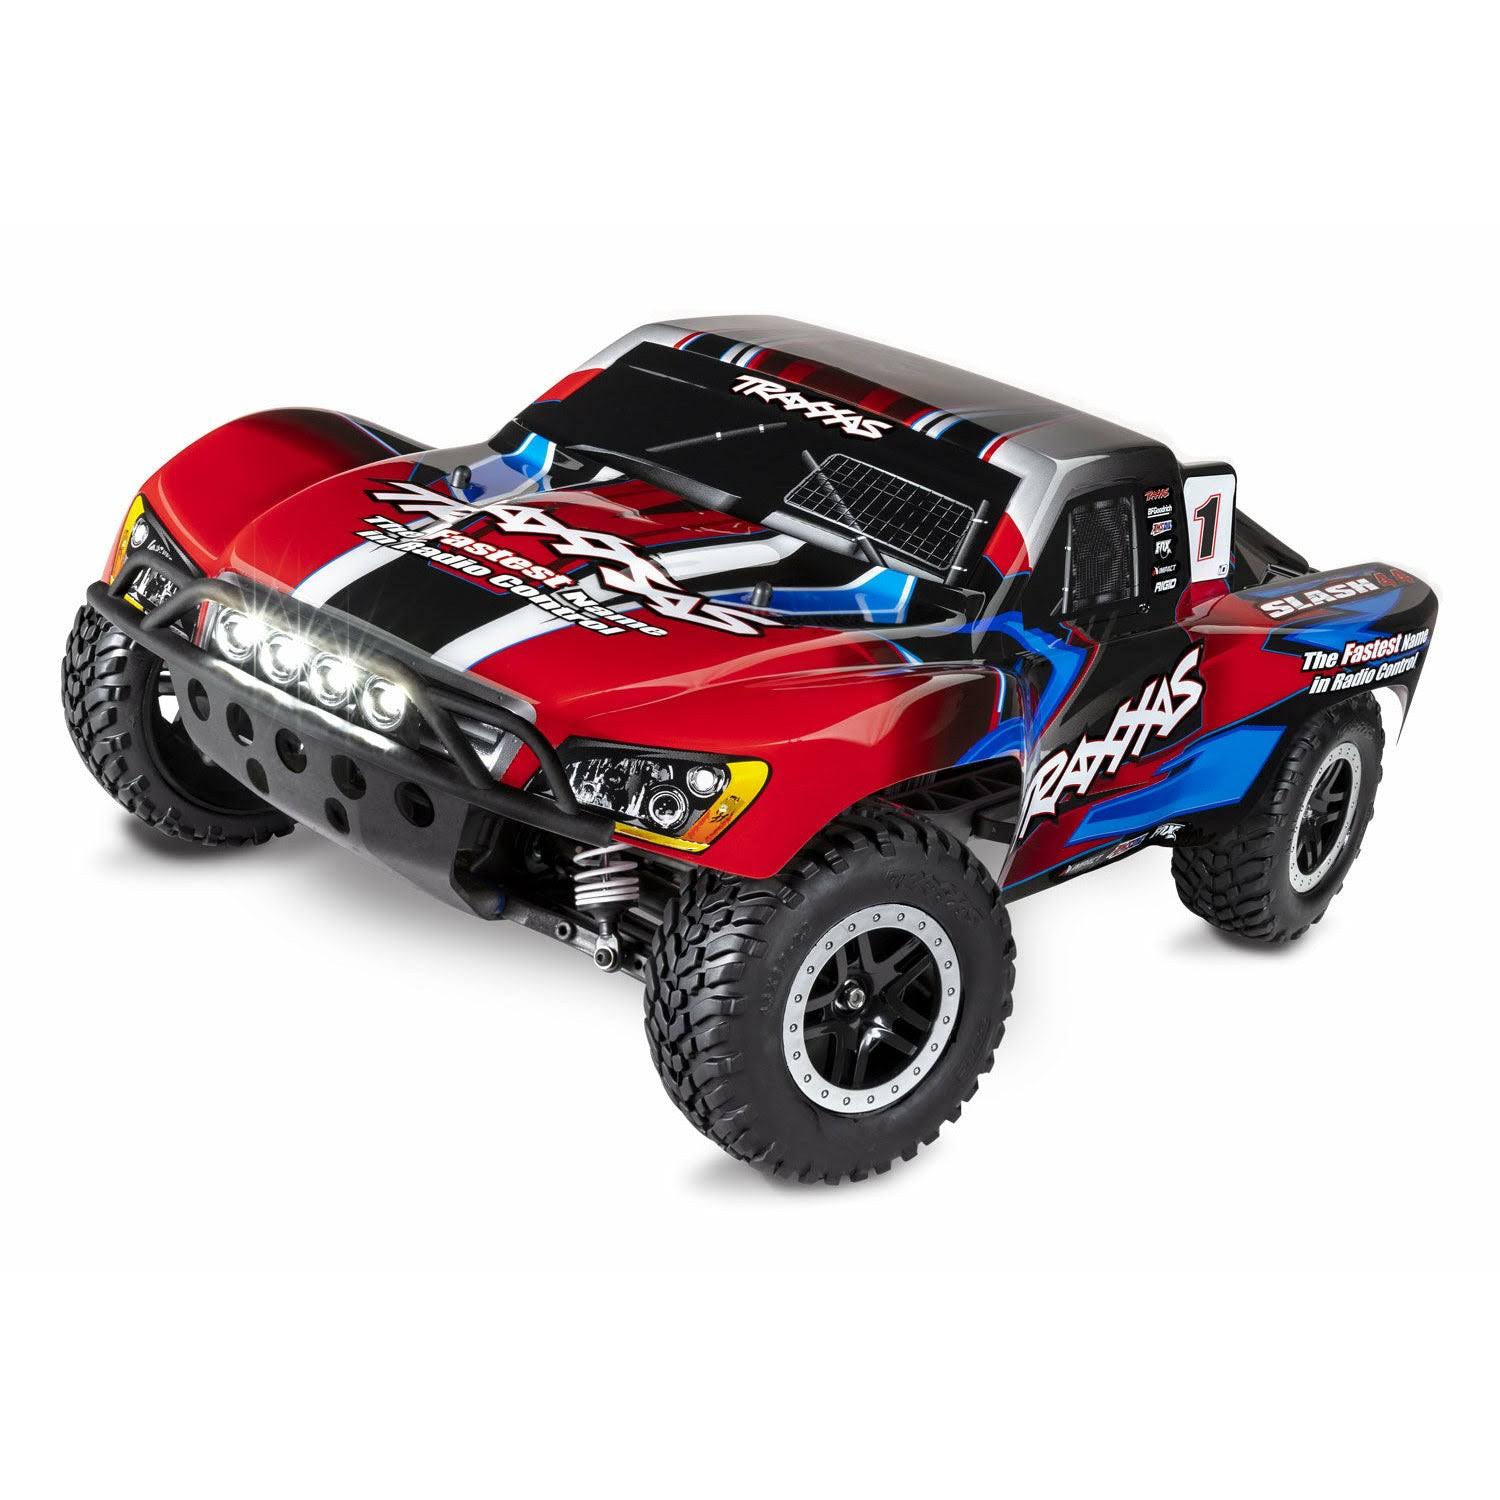 Traxxas Slash 4x4 Brushed RTR - Red with LED TRX68054-61-RED